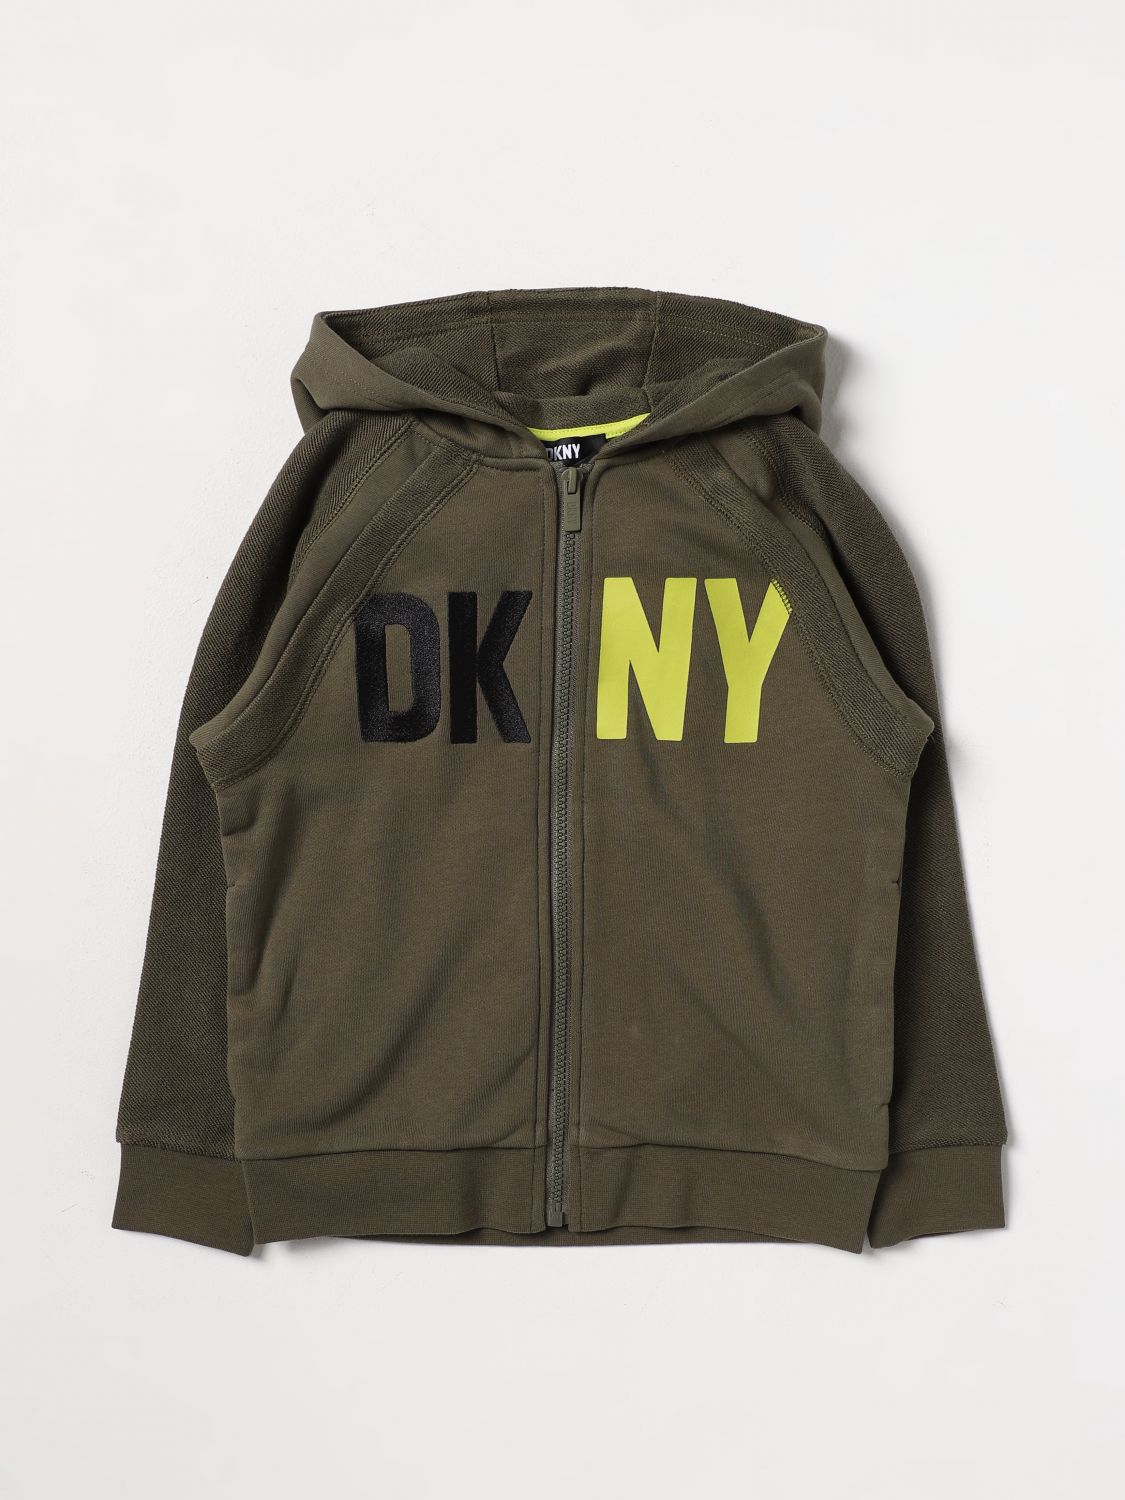 Dkny Sweater  Kids Color Green